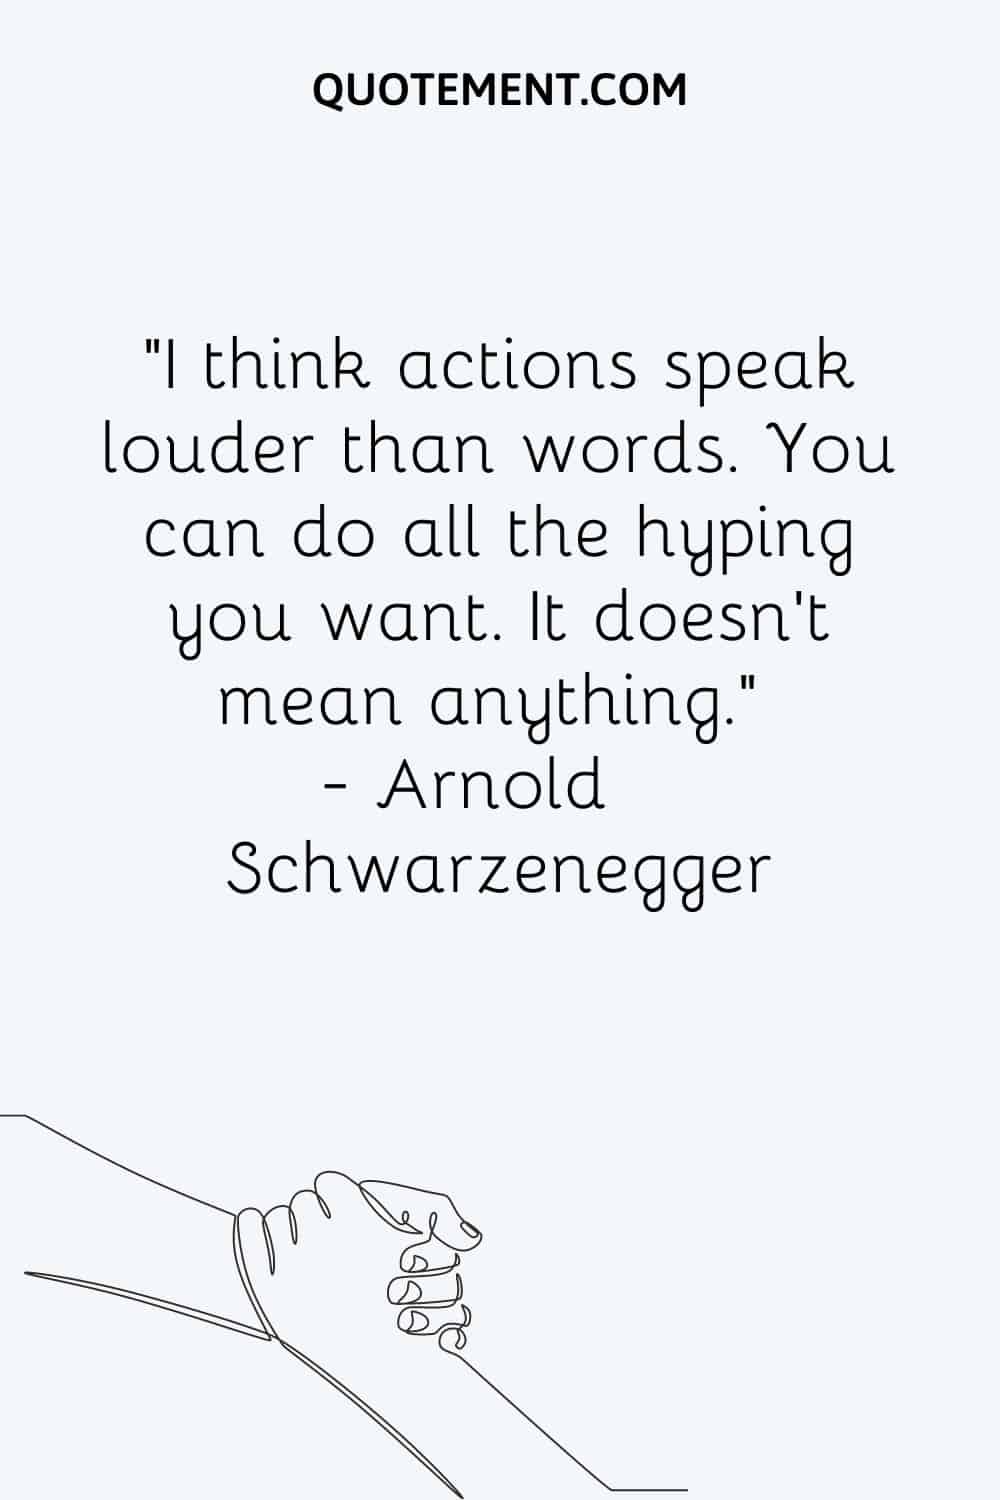 I think actions speak louder than words